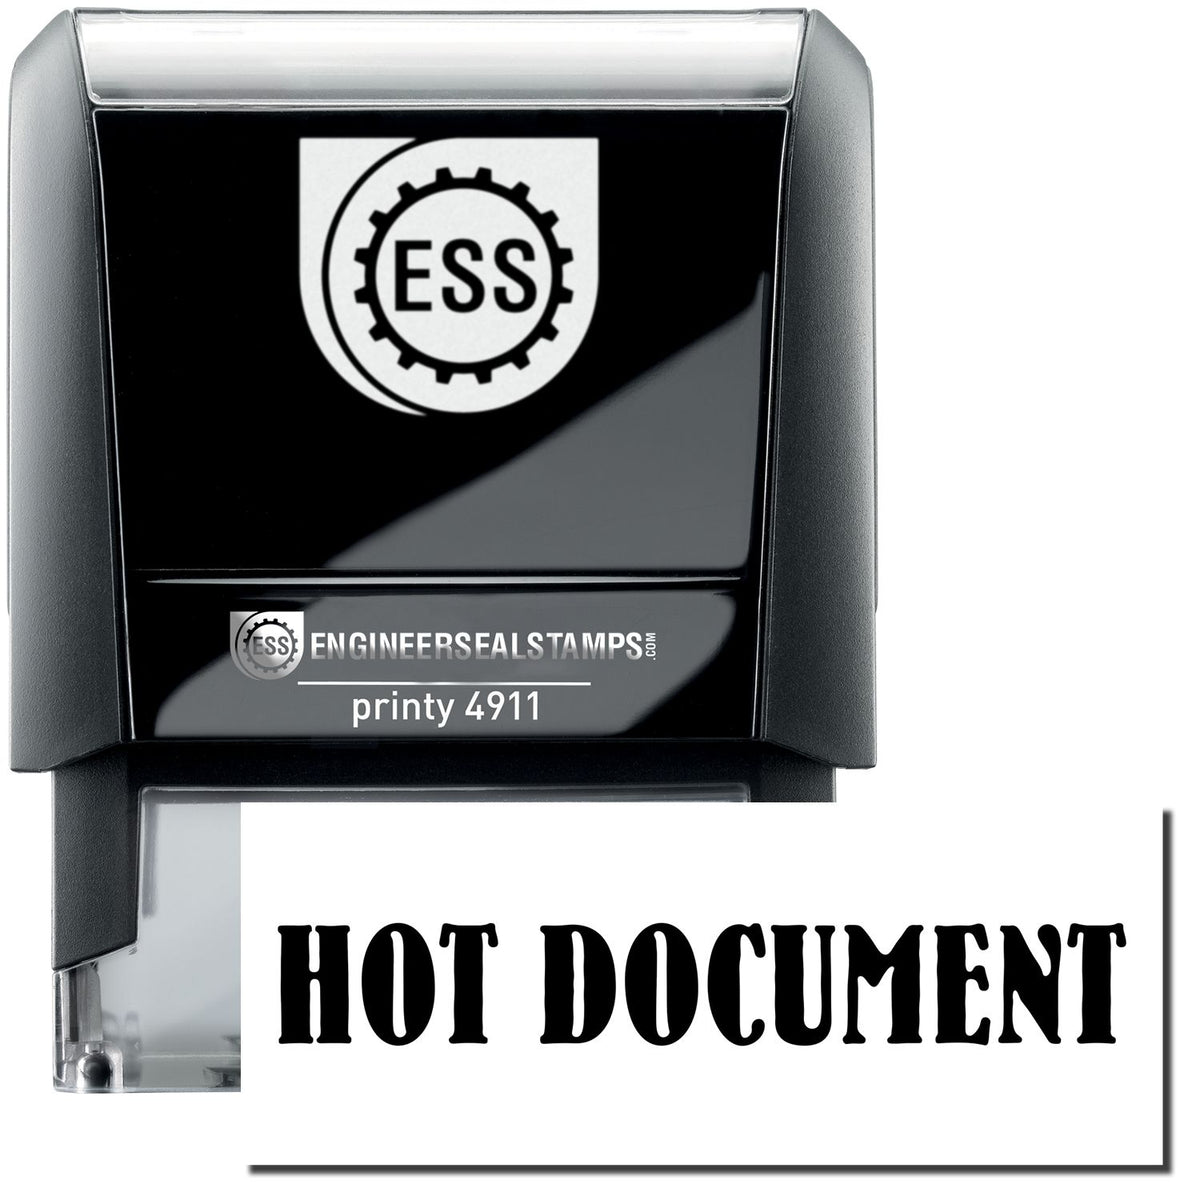 A self-inking stamp with a stamped image showing how the text &quot;HOT DOCUMENT&quot; is displayed after stamping.